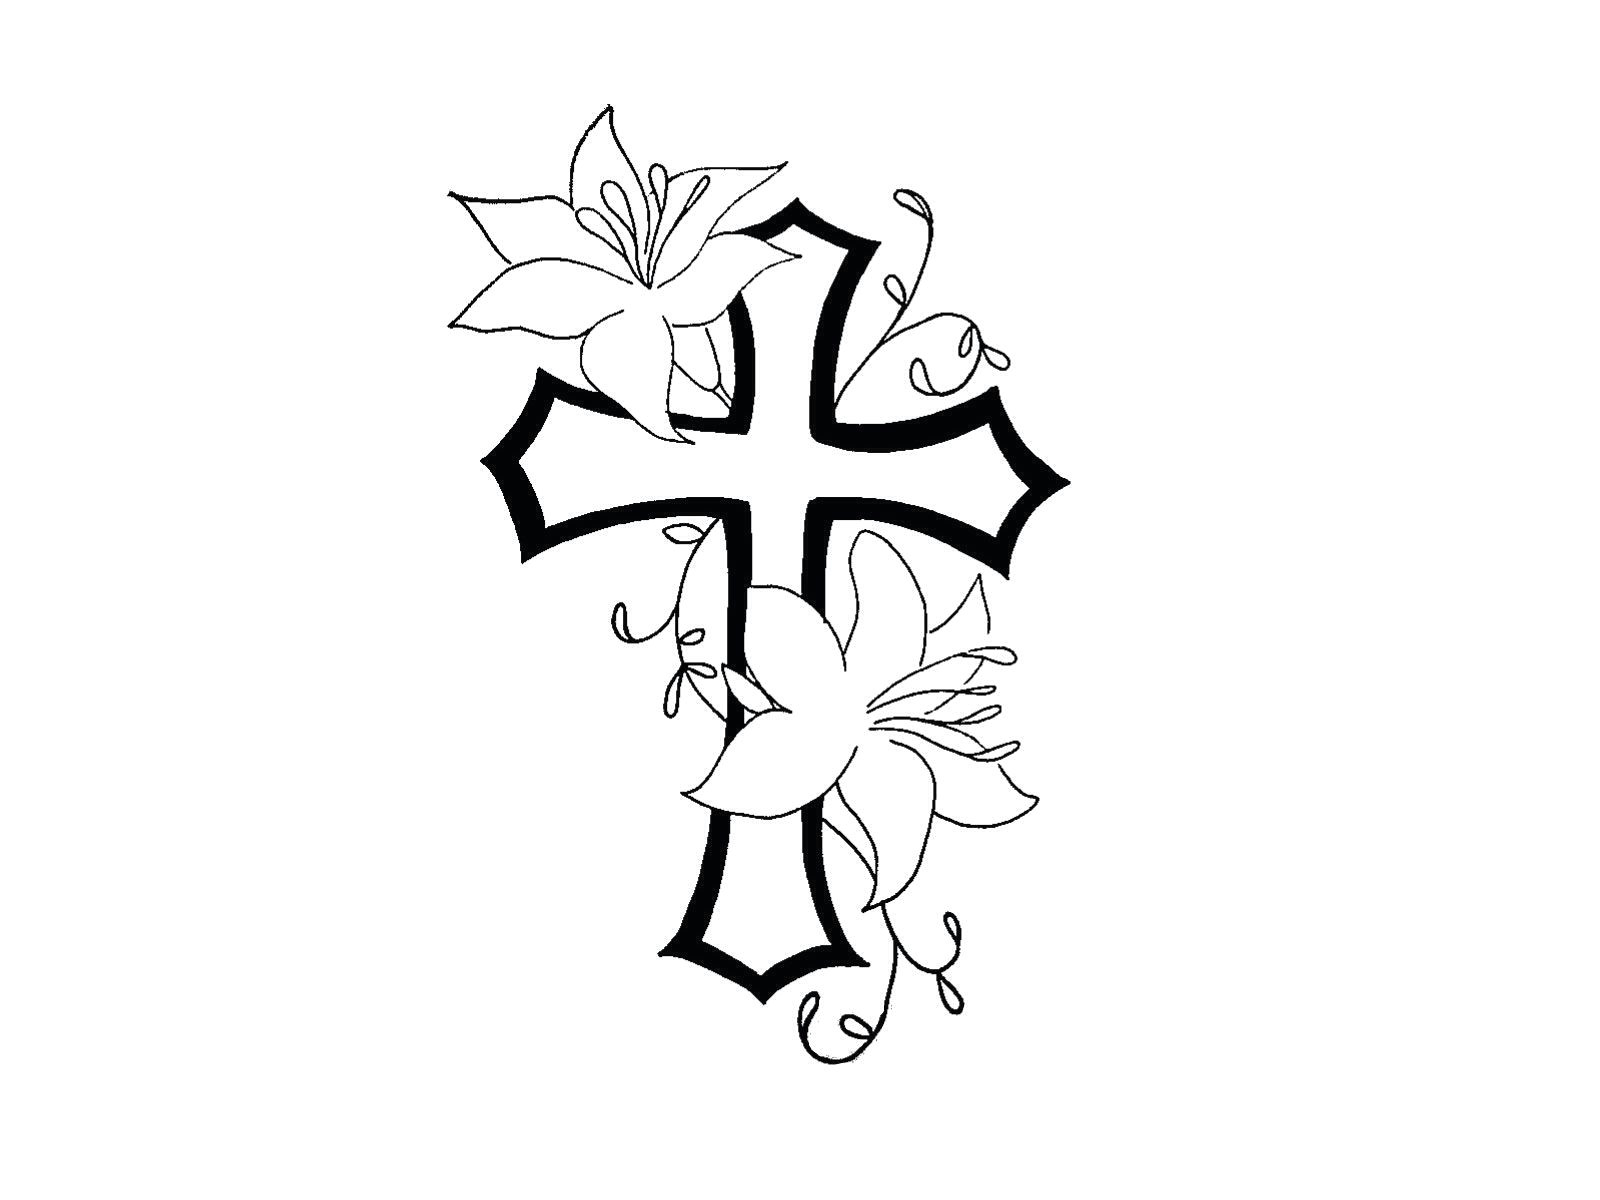 Drawings Of Flowers and Crosses Pin by Miranda Davis On D R A W I N G S Pinterest Tattoos Cross